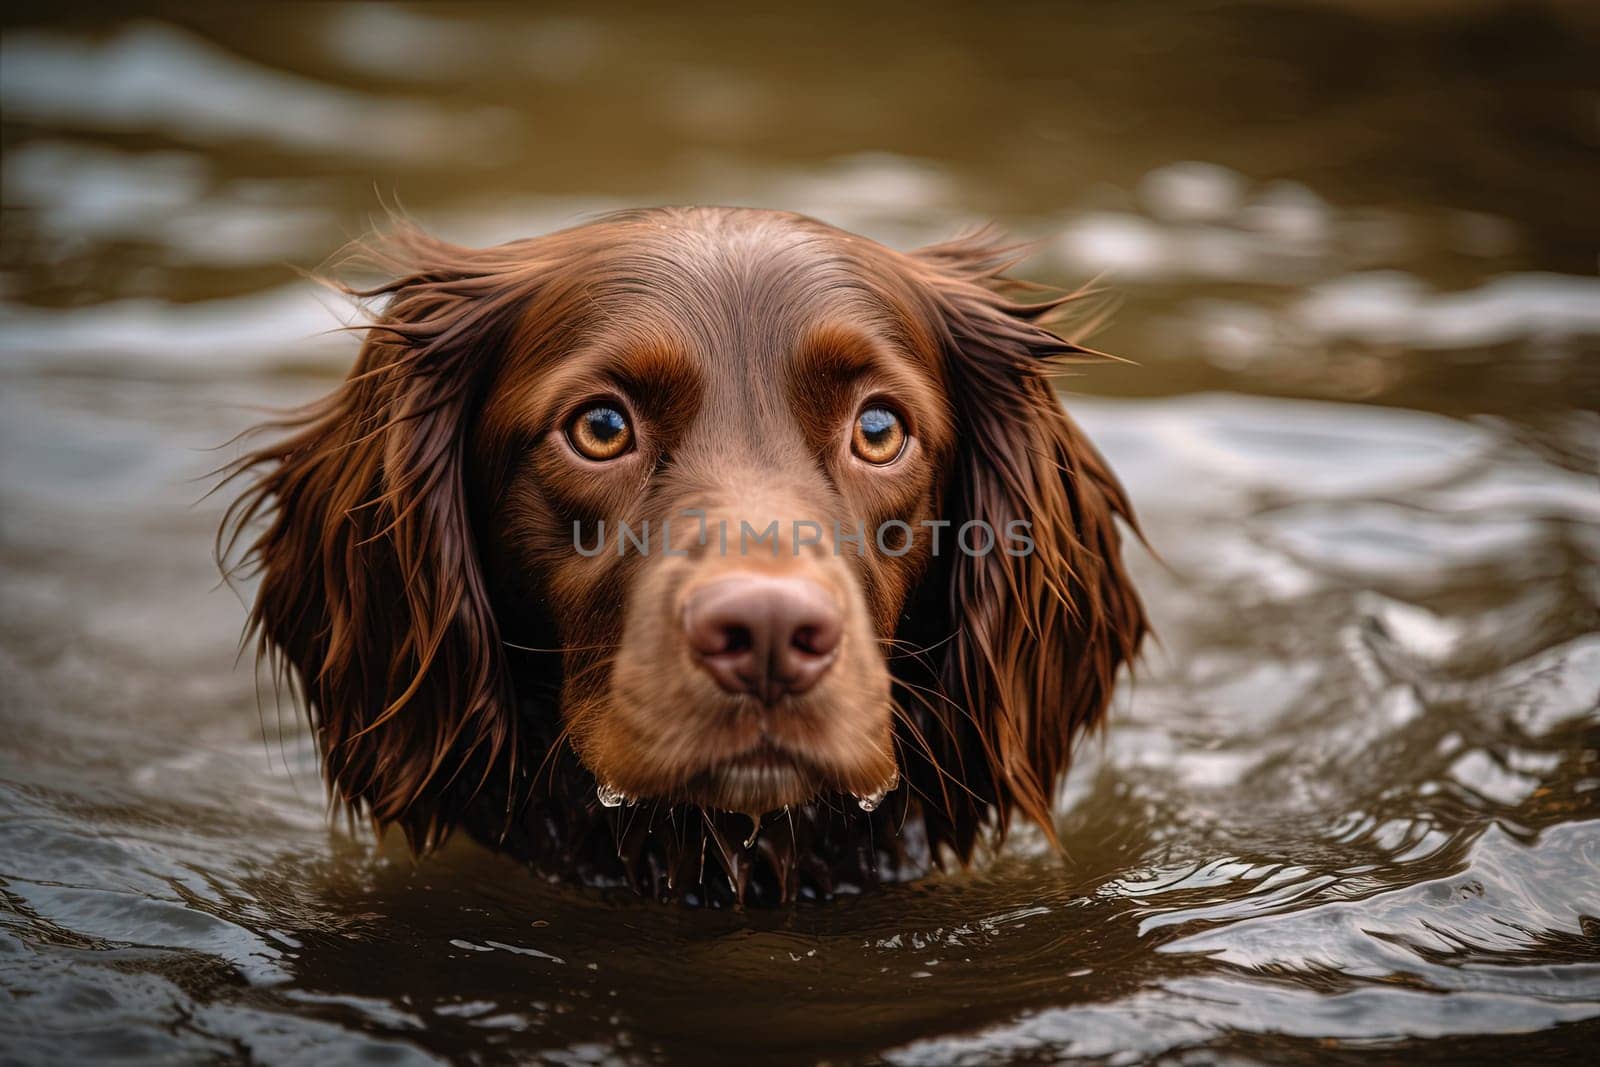 Dog loves swimming in water during hot summer days.